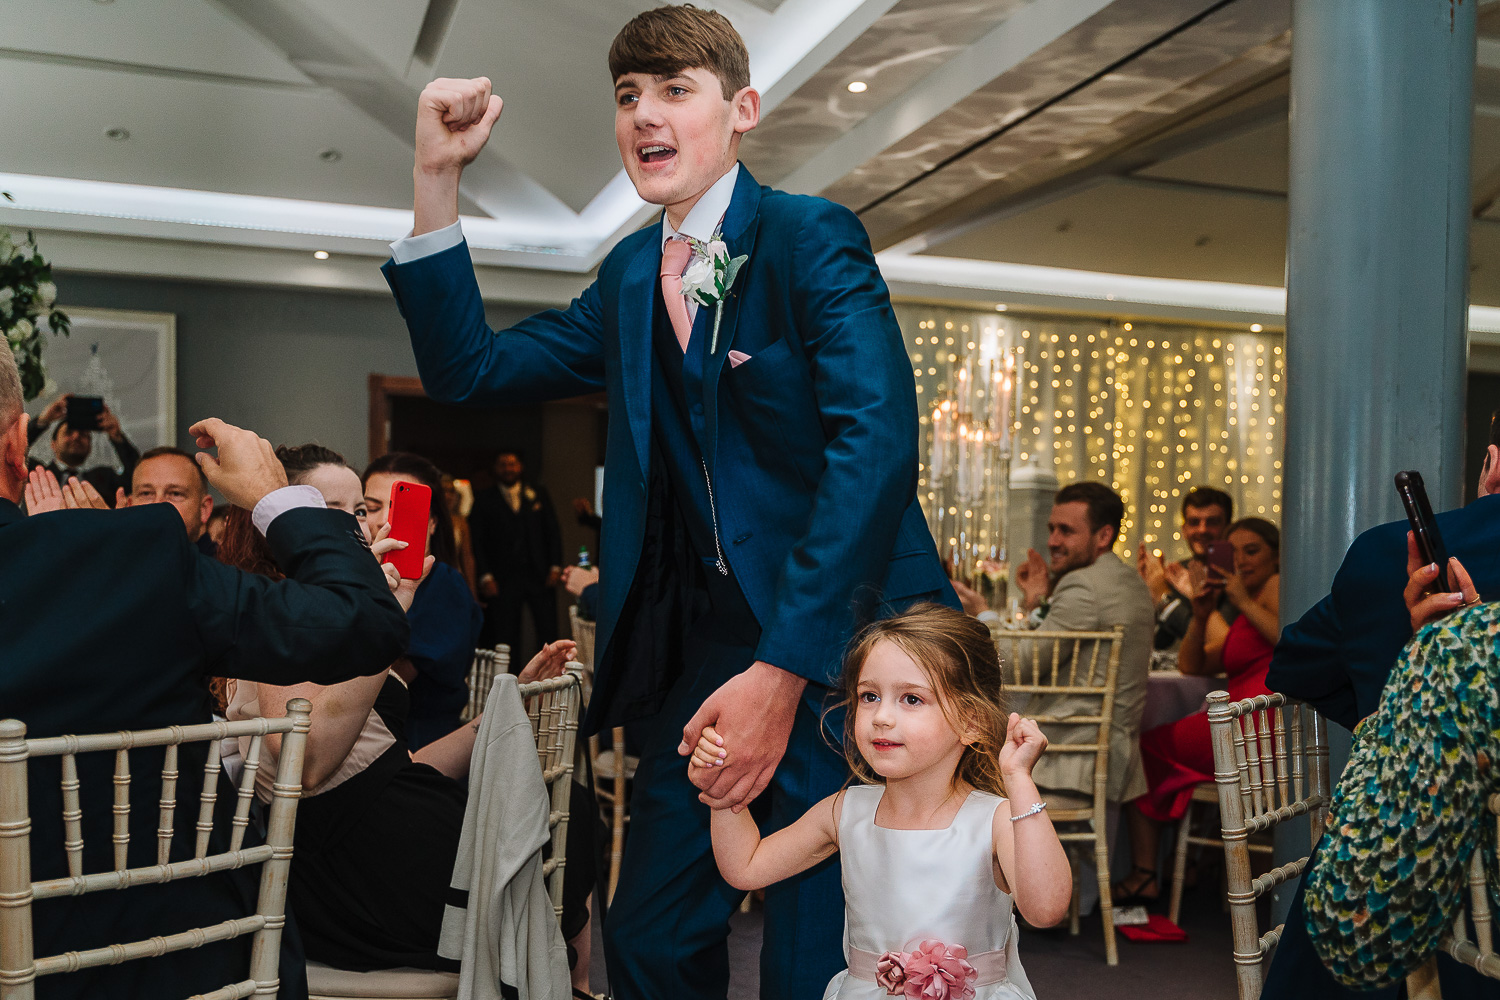 Son dancing with sister